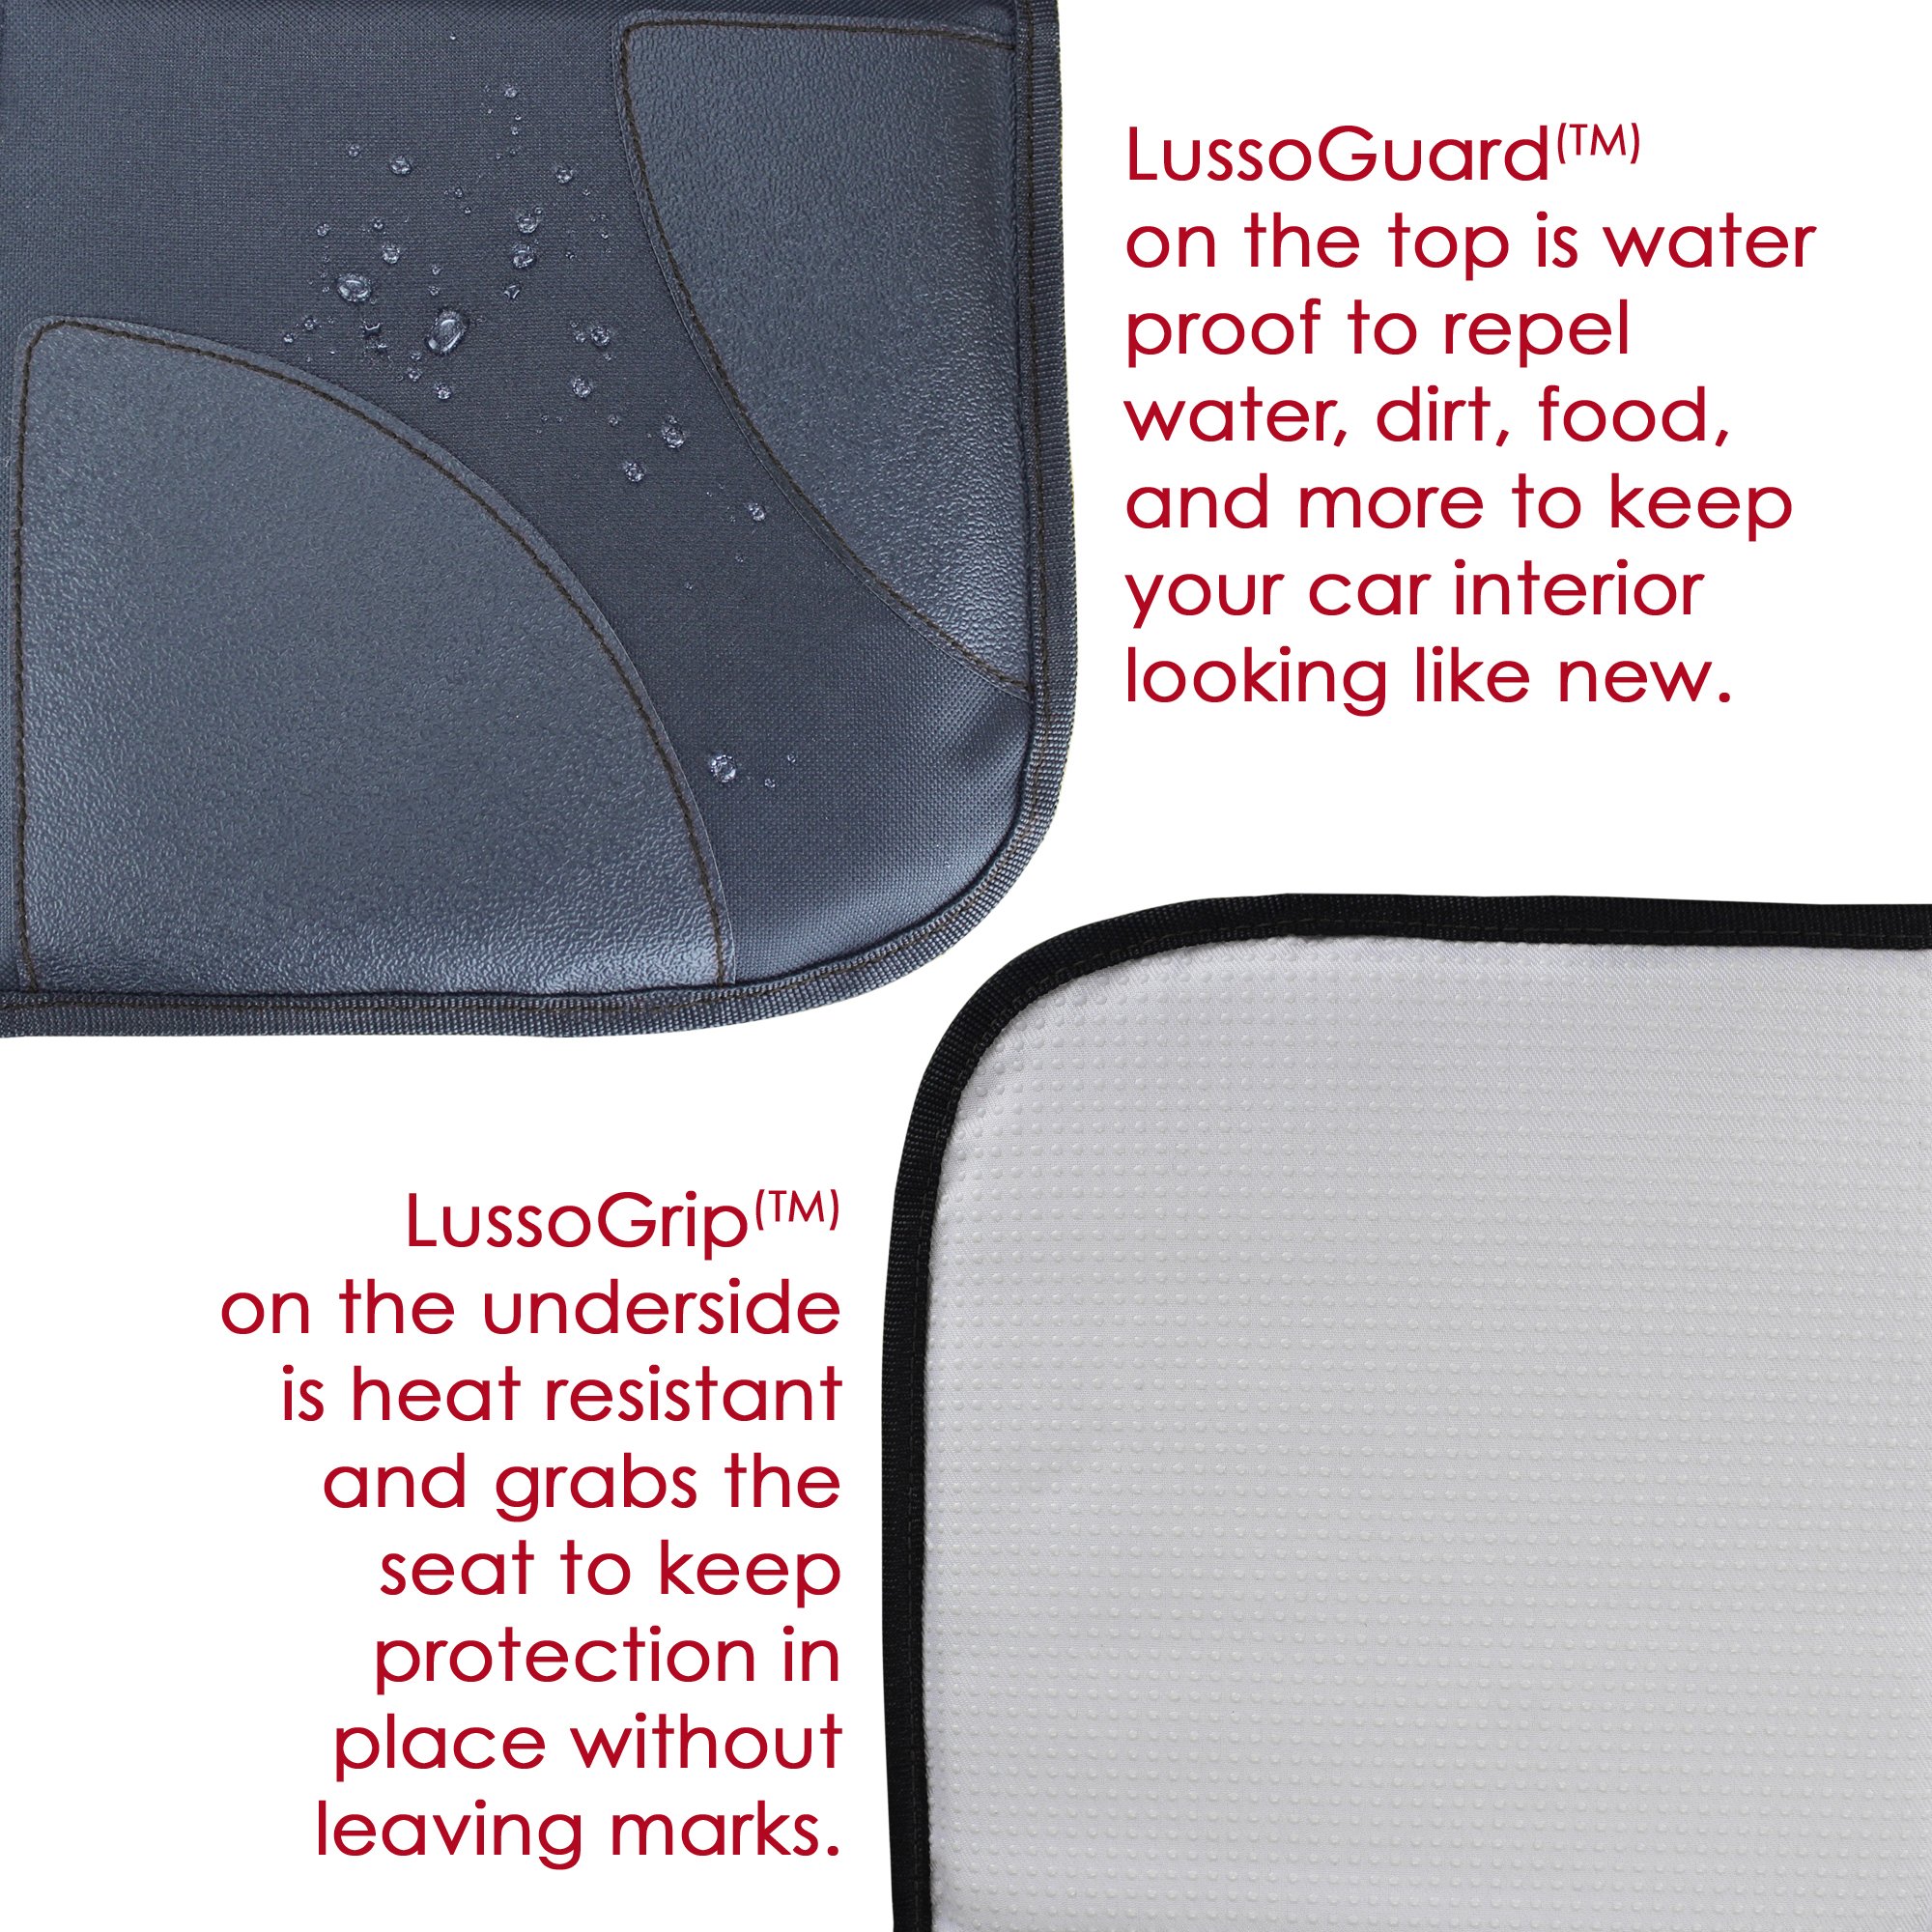 Lusso Gear Two Pack of Car Seat Protector (Black) + Two Pack of Heavy Duty Kick Mats (Black), Waterproof, Protects Fabric or Leather Seats, Premium Oxford Fabric, Travel Essentials…